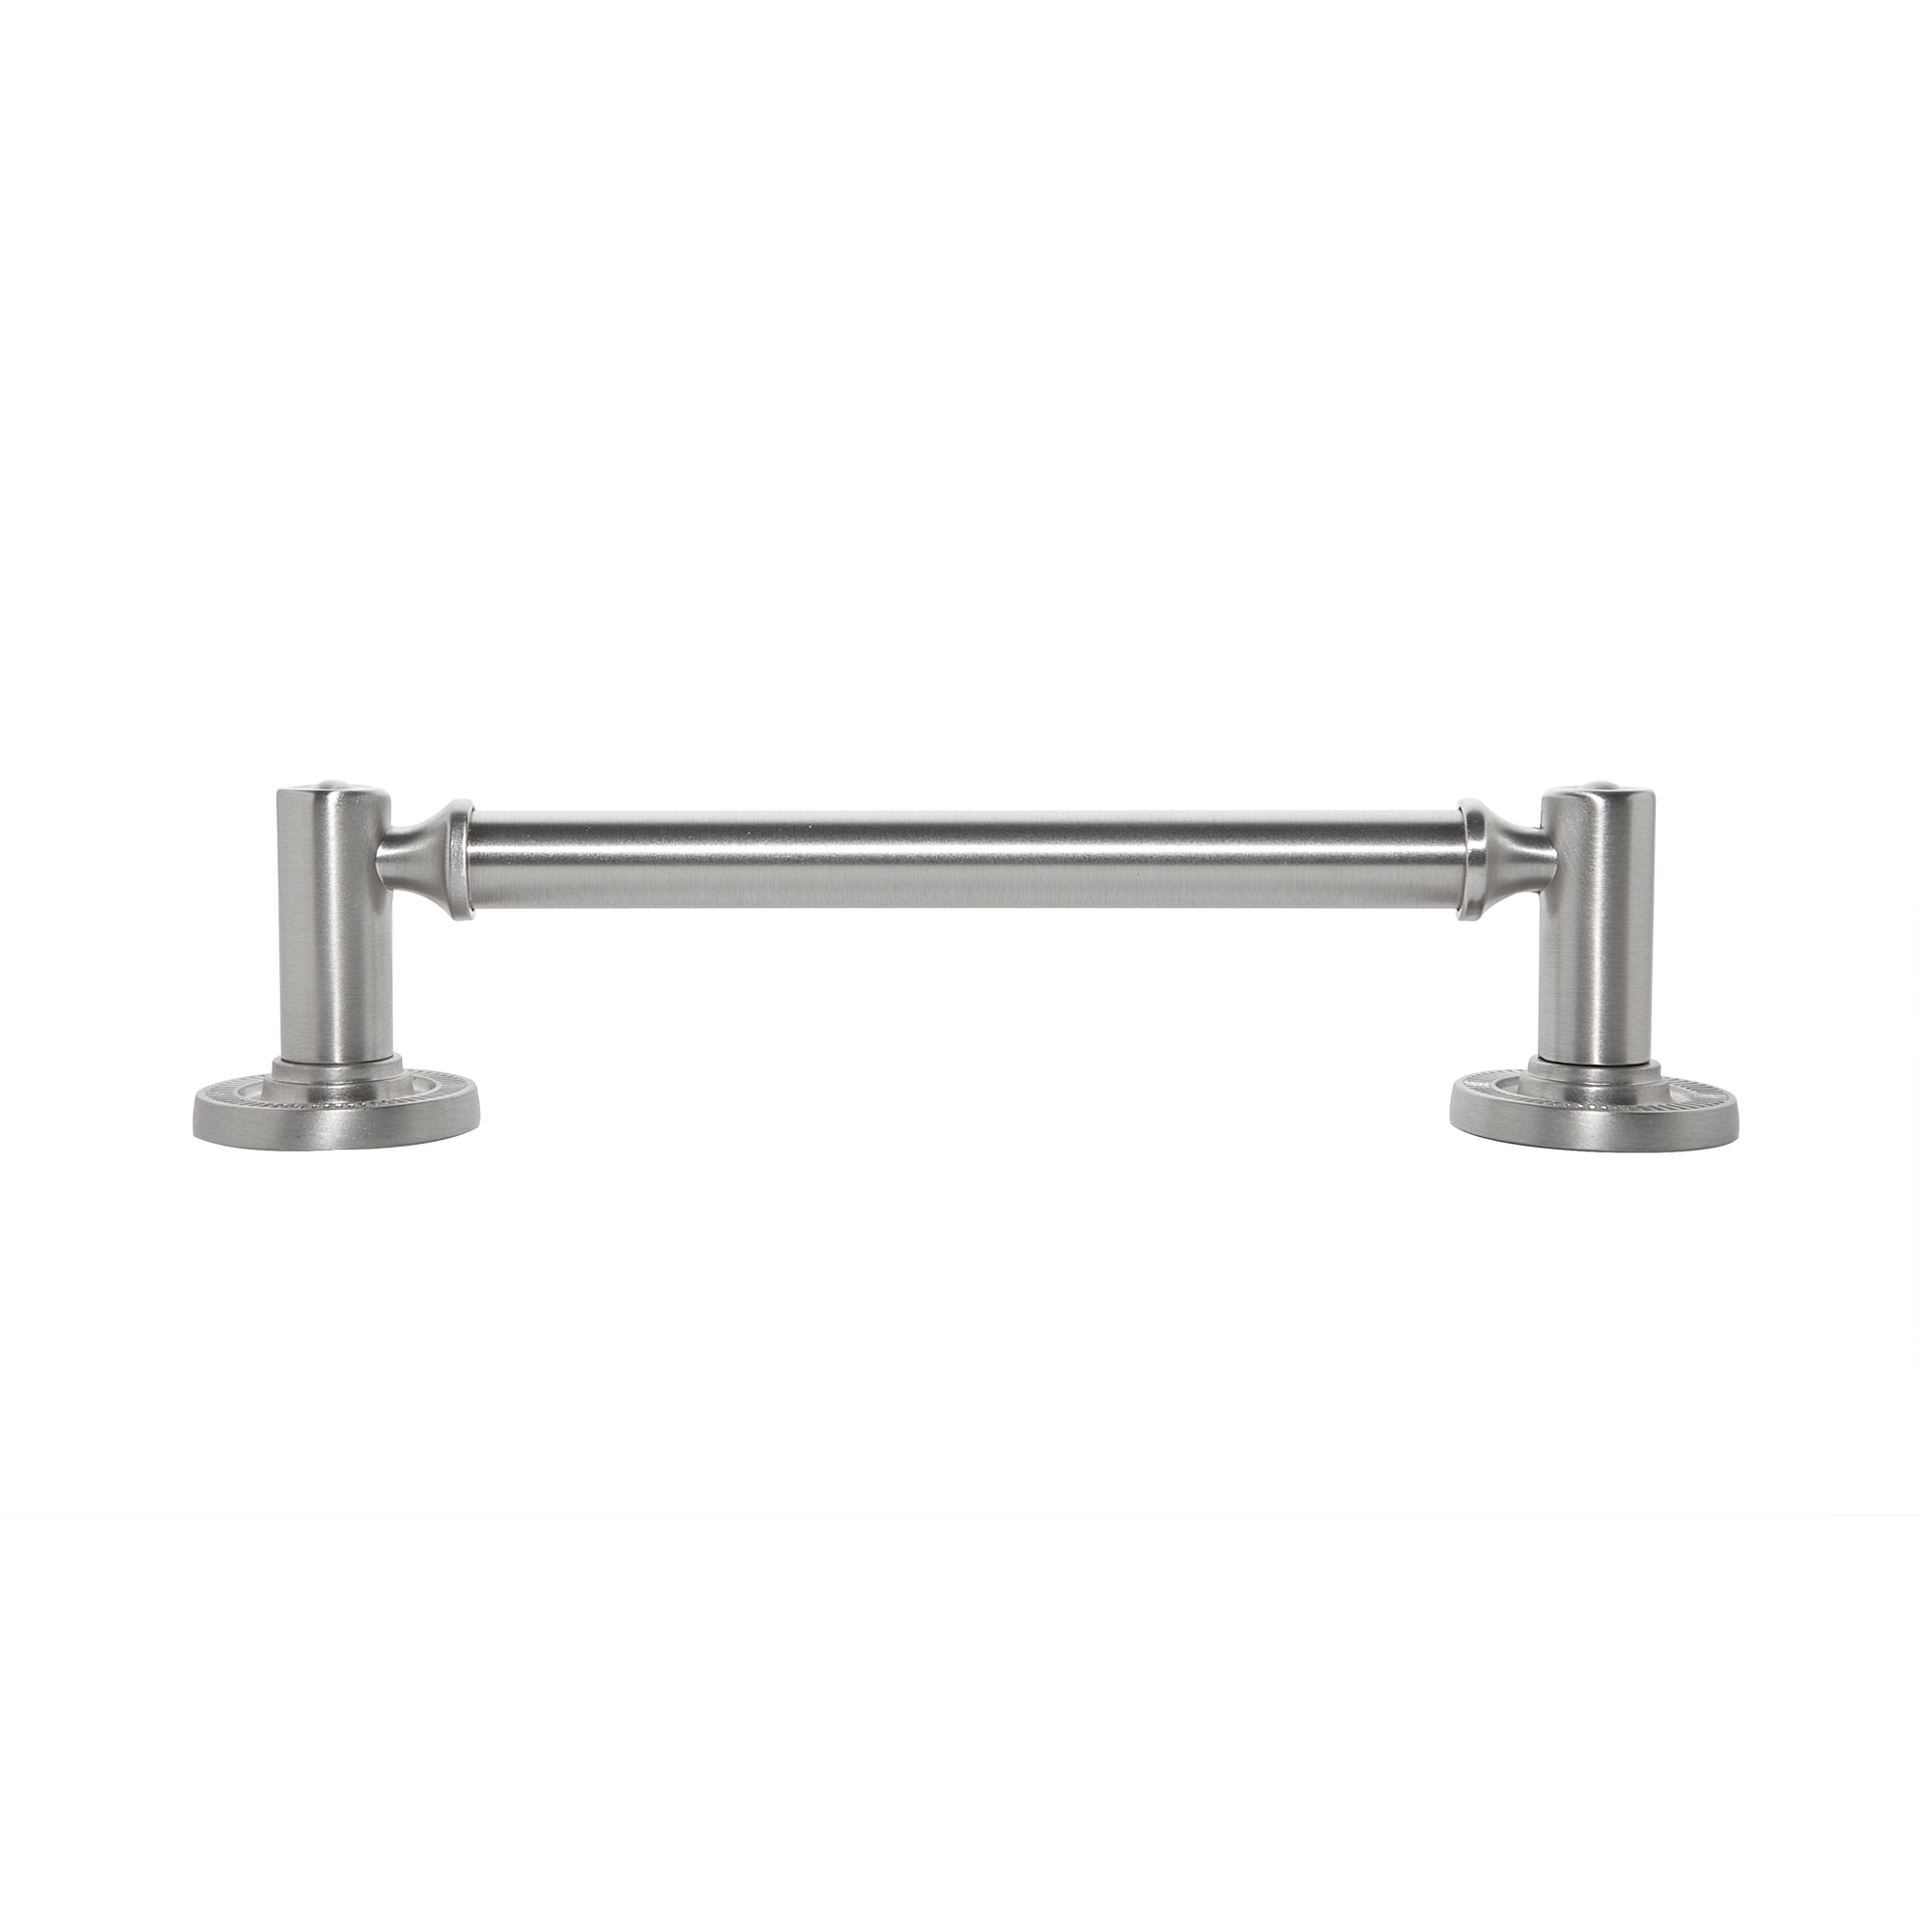 Sumner Street Home Hardware Minted 6-in Center to Center Satin Brass  Cylindrical Bar Drawer Pulls